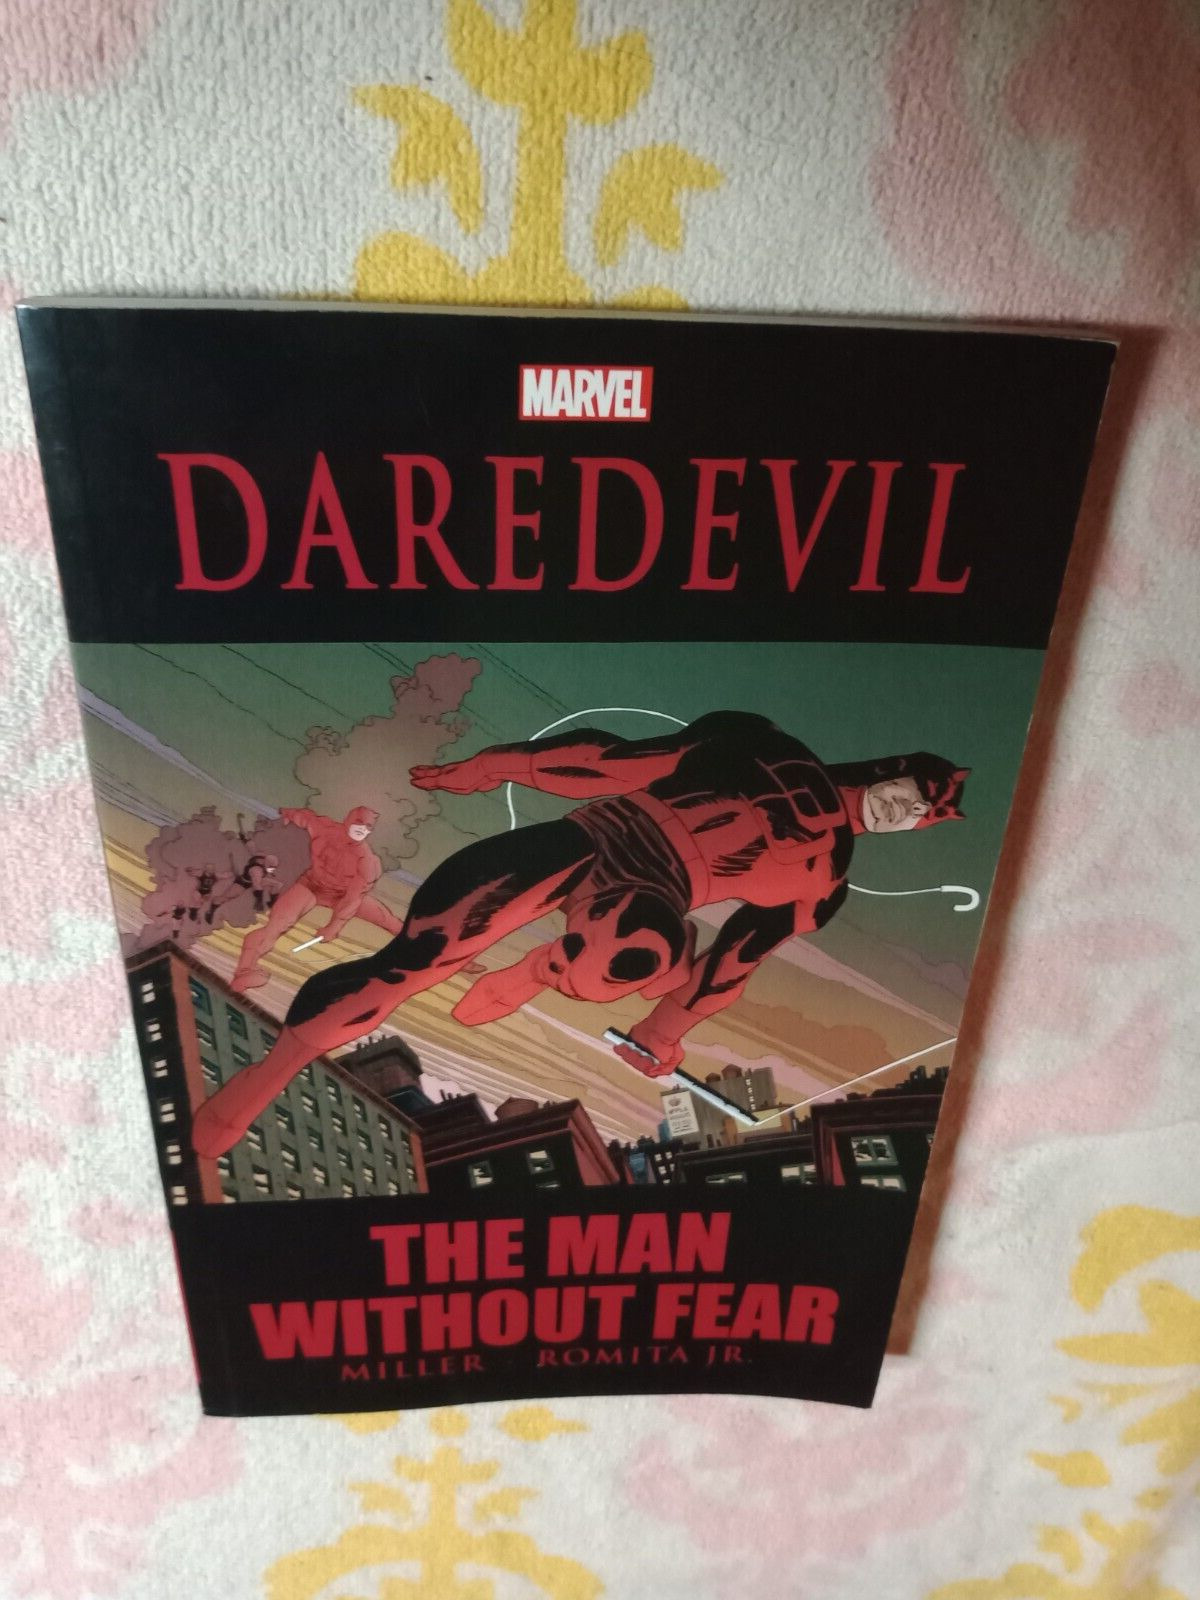 Daredevil The Man Without Fear Trade Paperback #1  in NM-